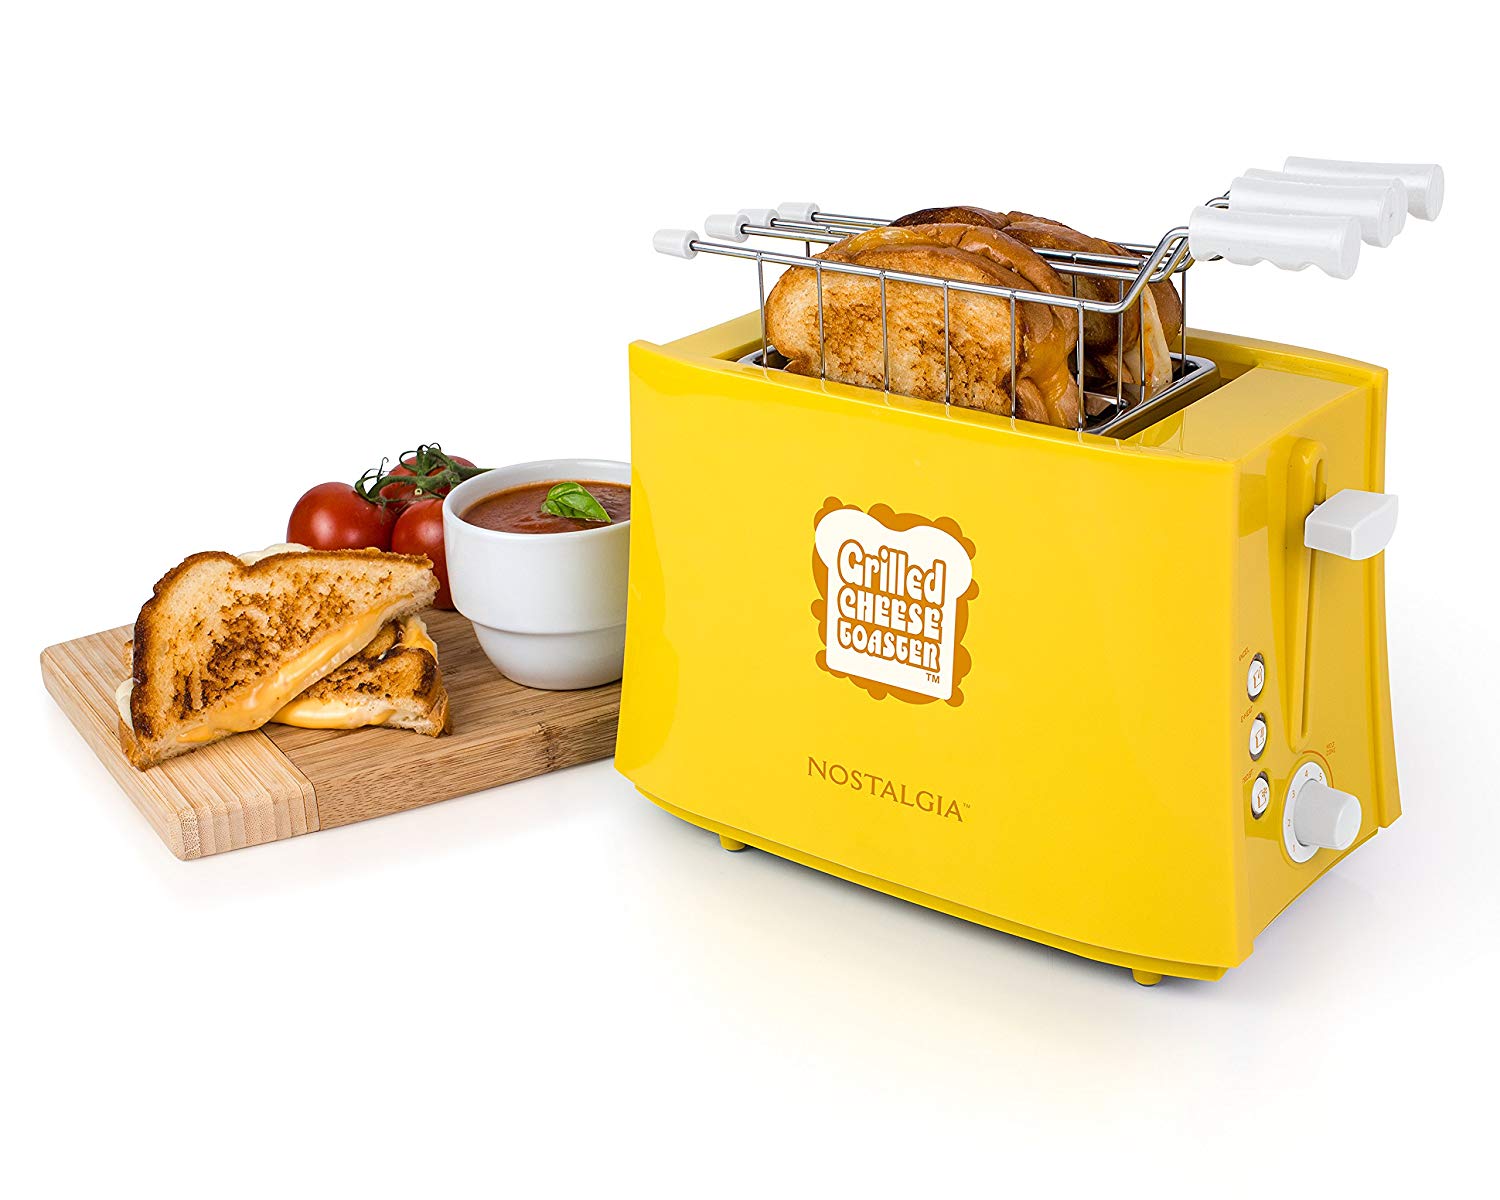 If You Love Grilled Cheese, You Need This Grilled Cheese Toaster